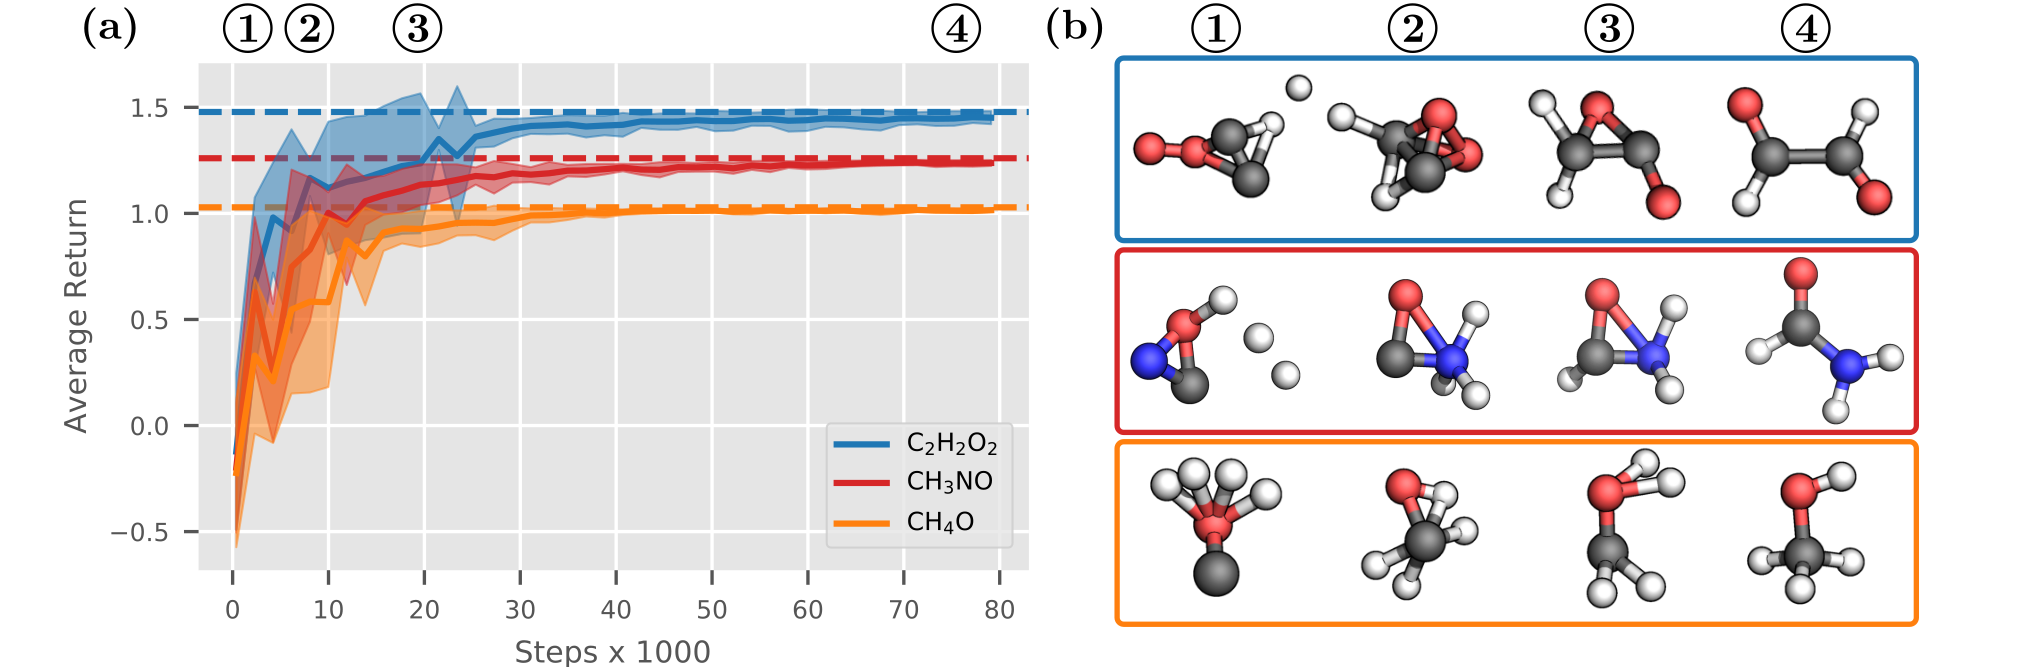 (a) The $\mathsf{Internal}$ agent is able to build stable molecules from the bags $\ce{CH3NO}, \ce{CH4O}$ and $\ce{C2H2O2}$. Each dashed line denotes the optimal return for the corresponding bag.
    (b) Generated molecular structures at different terminal states over time show the agent's learning progress.